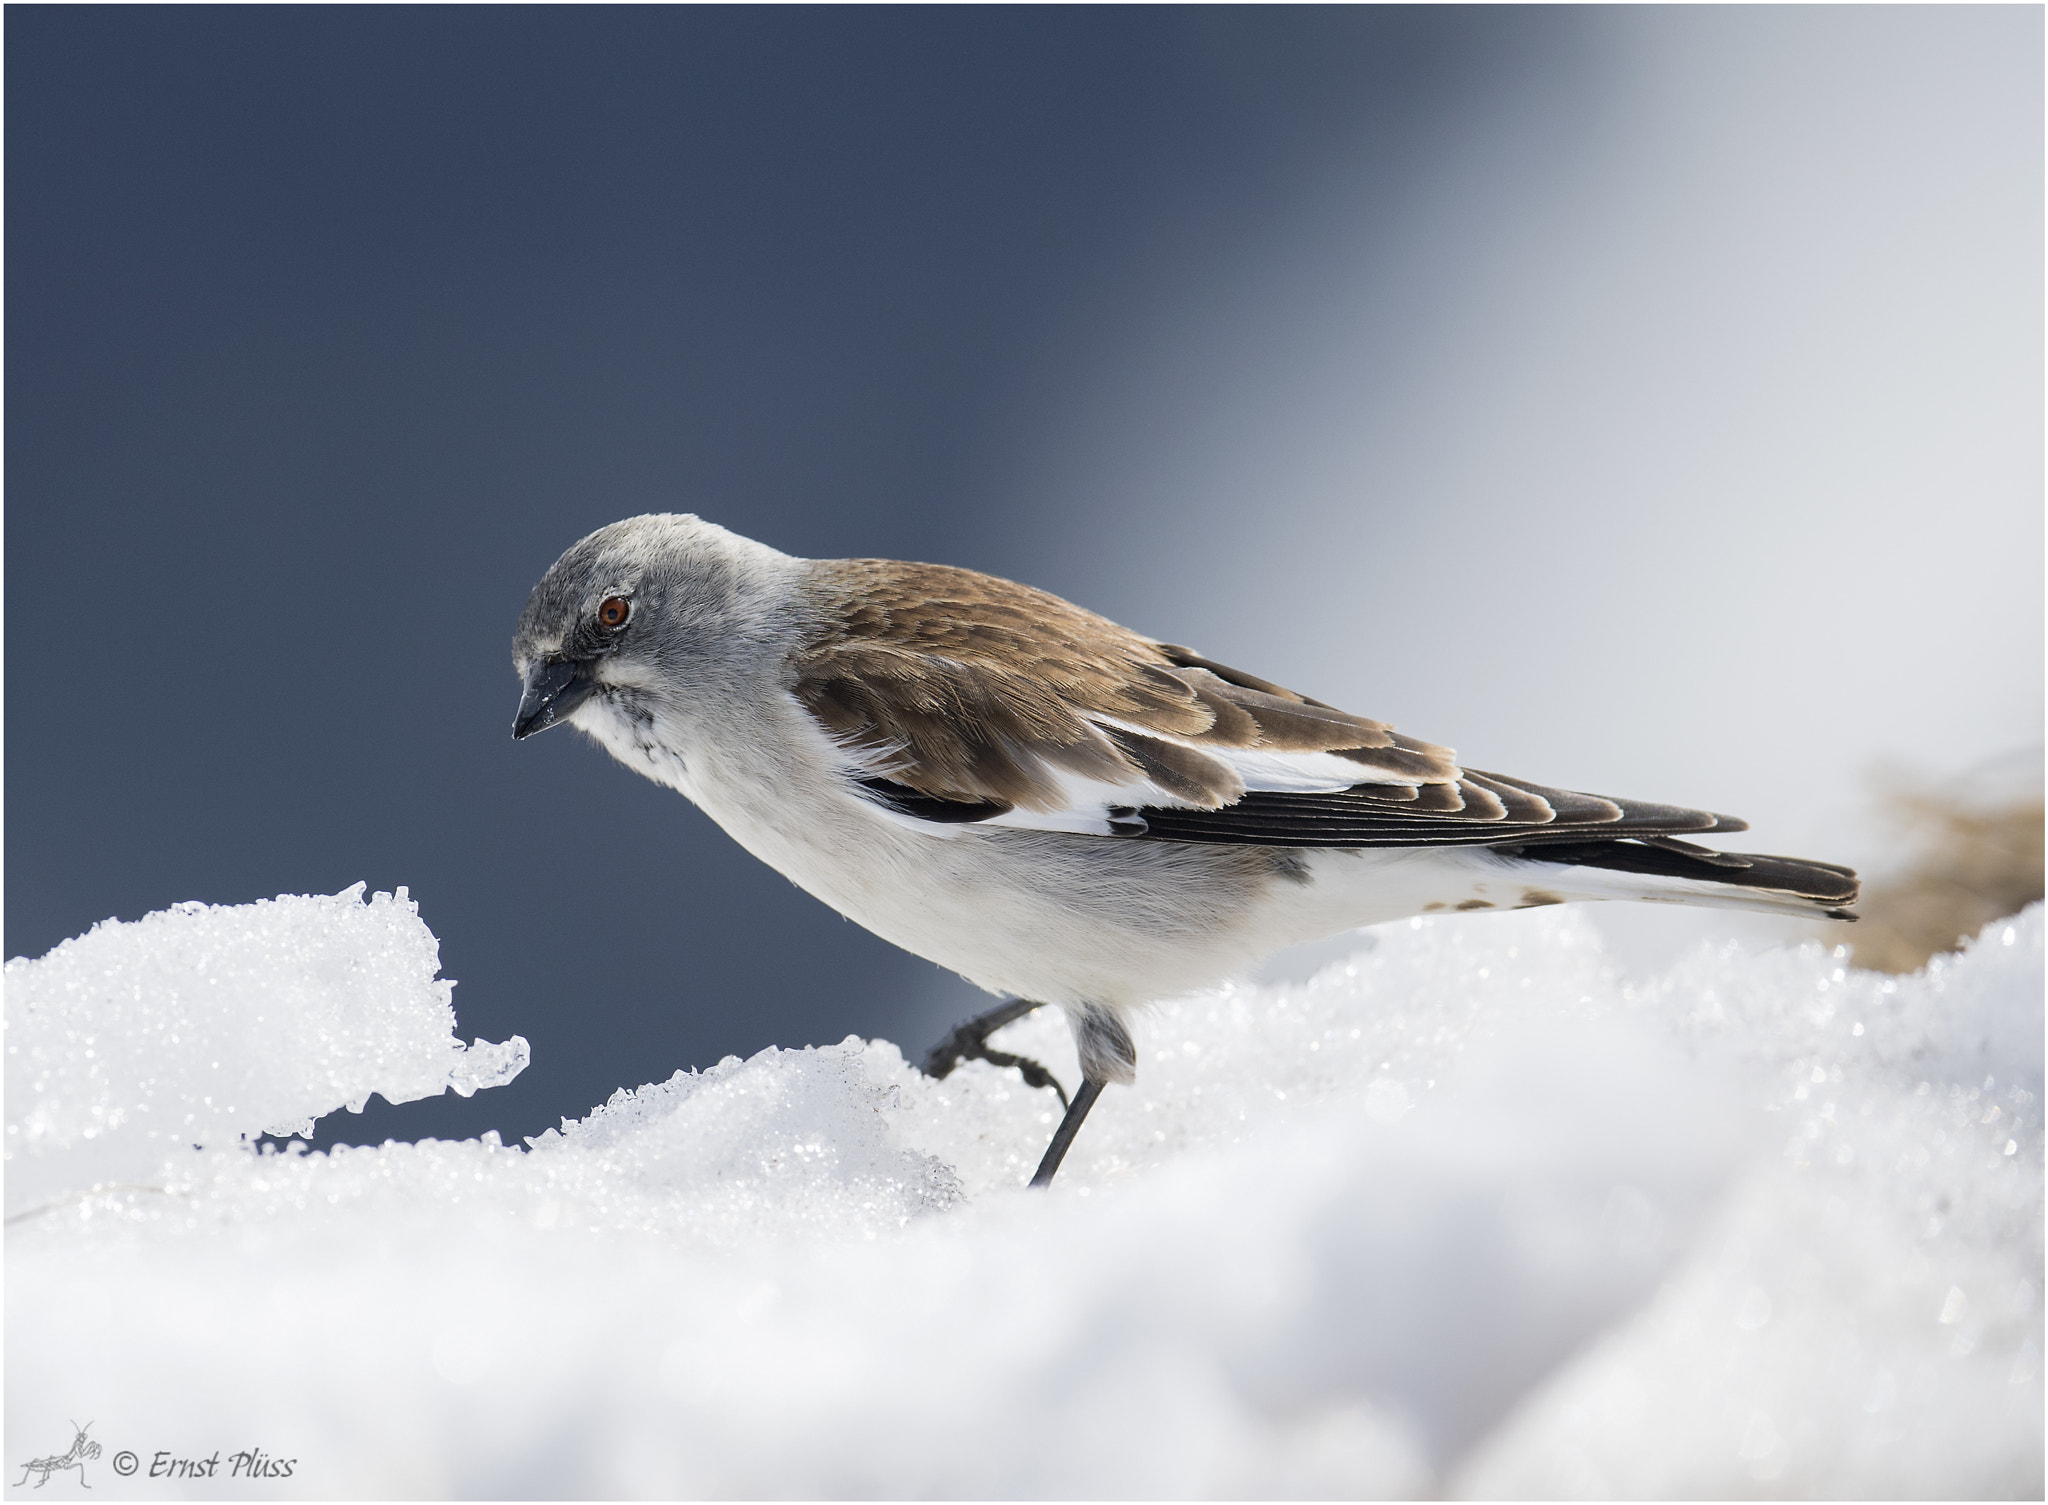 Nikon D5 sample photo. White-winged snowfinch photography